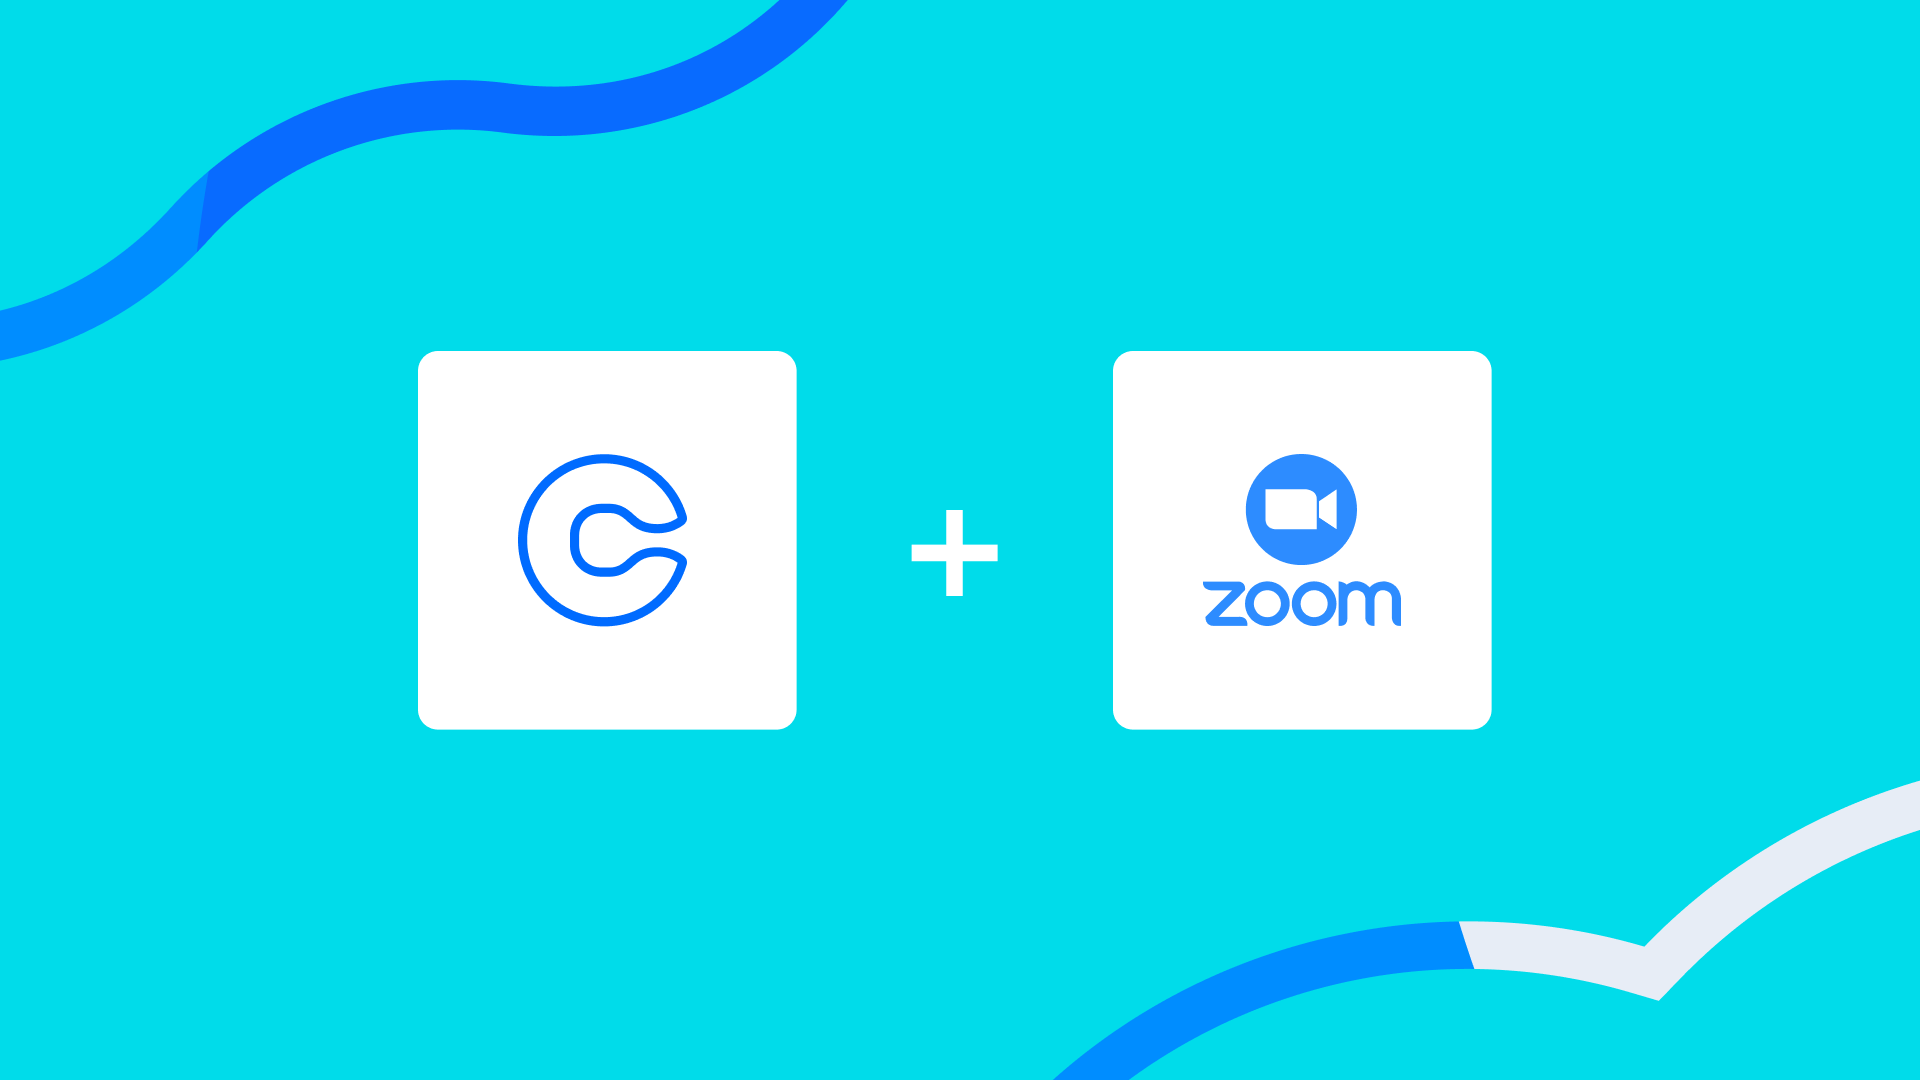 With Calendly and Zoom, anyone you invite to a meeting can